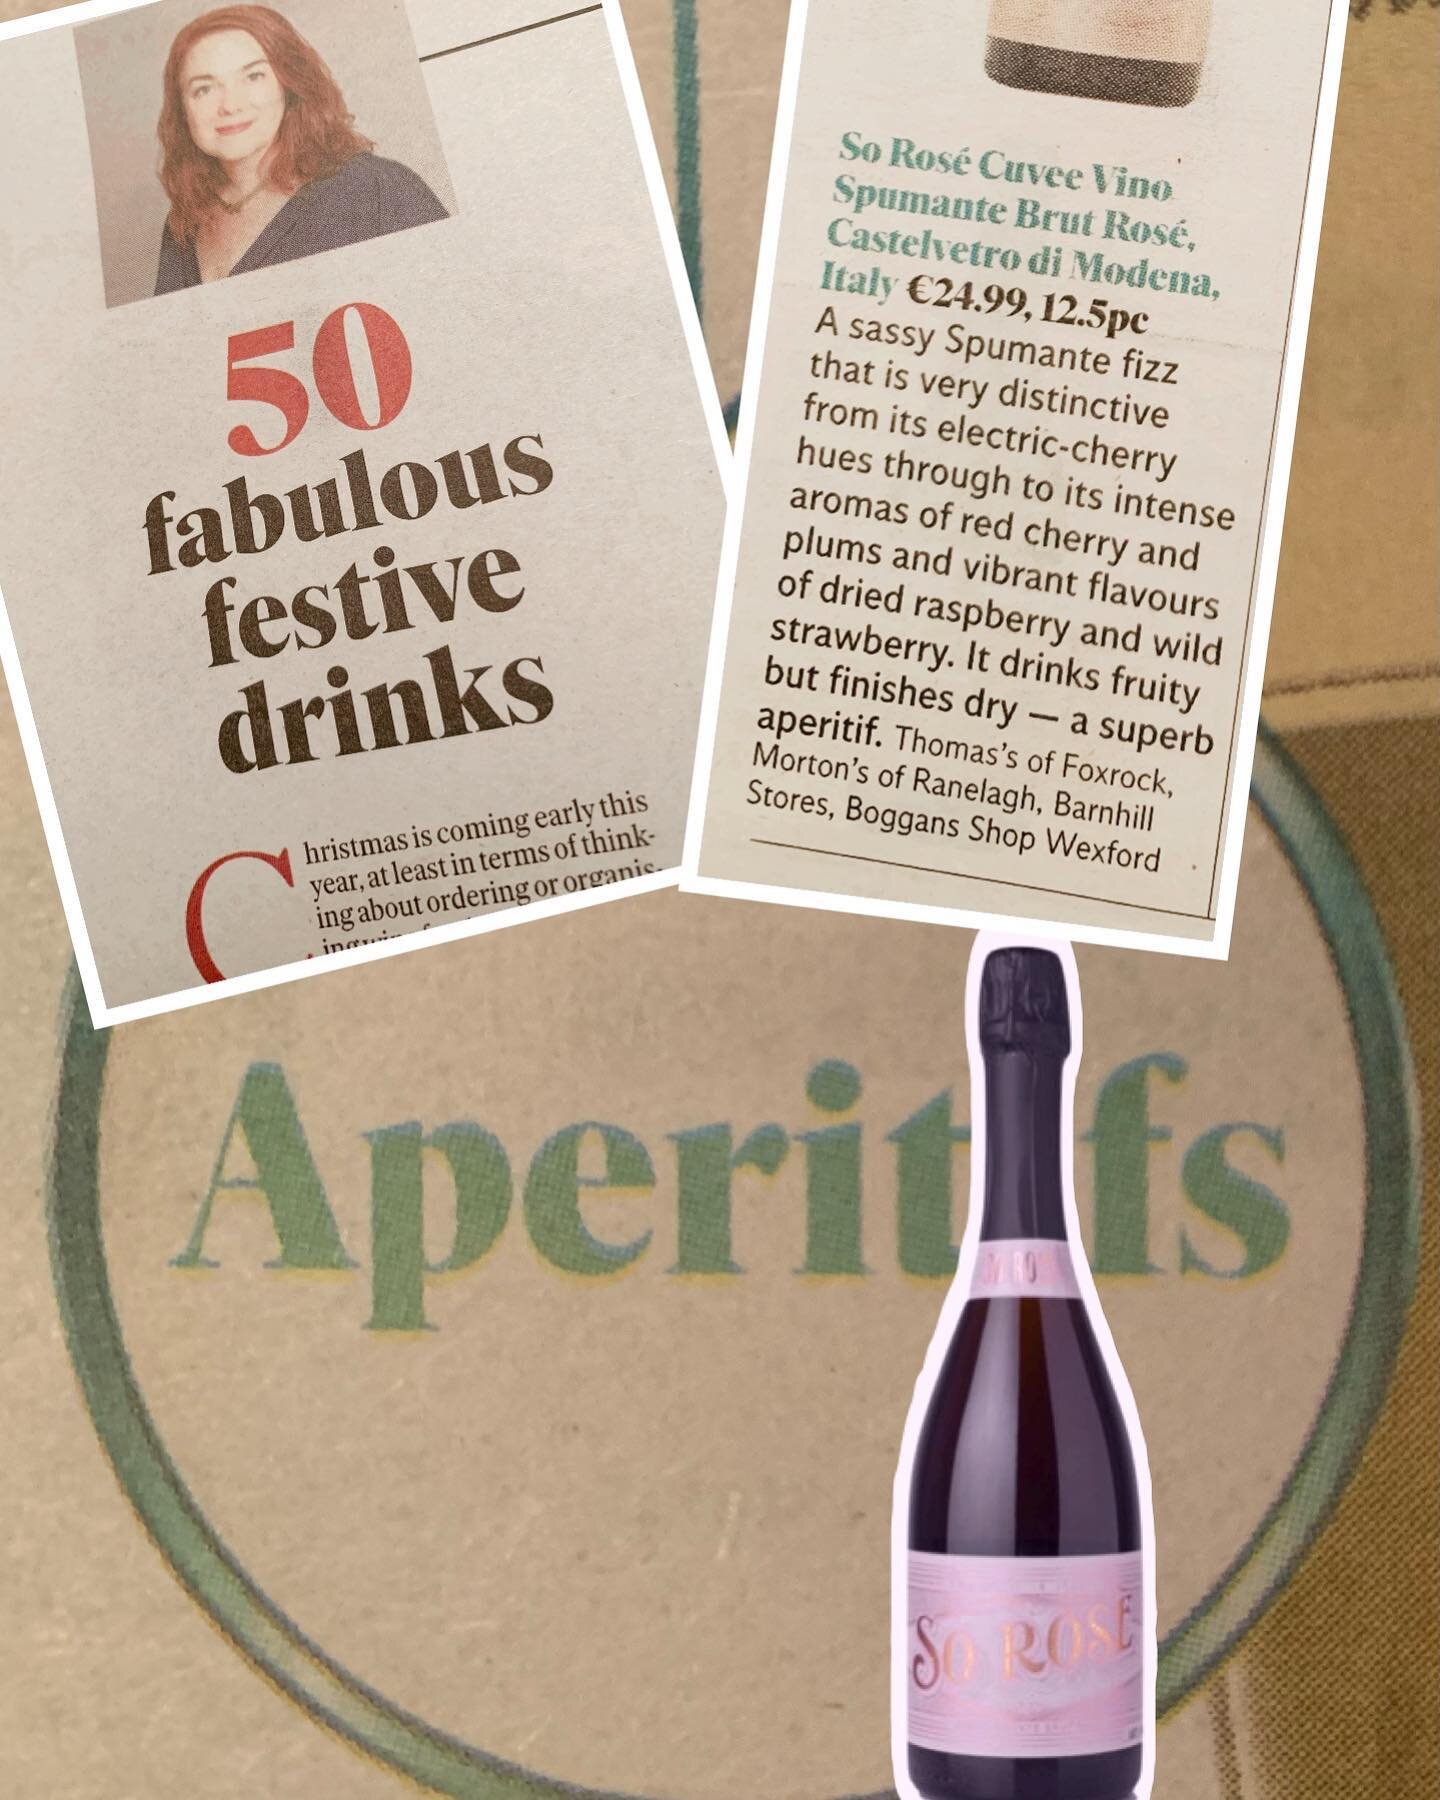 Thank you @aoifecarrigy_ for your review of our SO Ros&egrave; as a &ldquo;superb aperitif&rdquo; SO glad you enjoyed it 💜